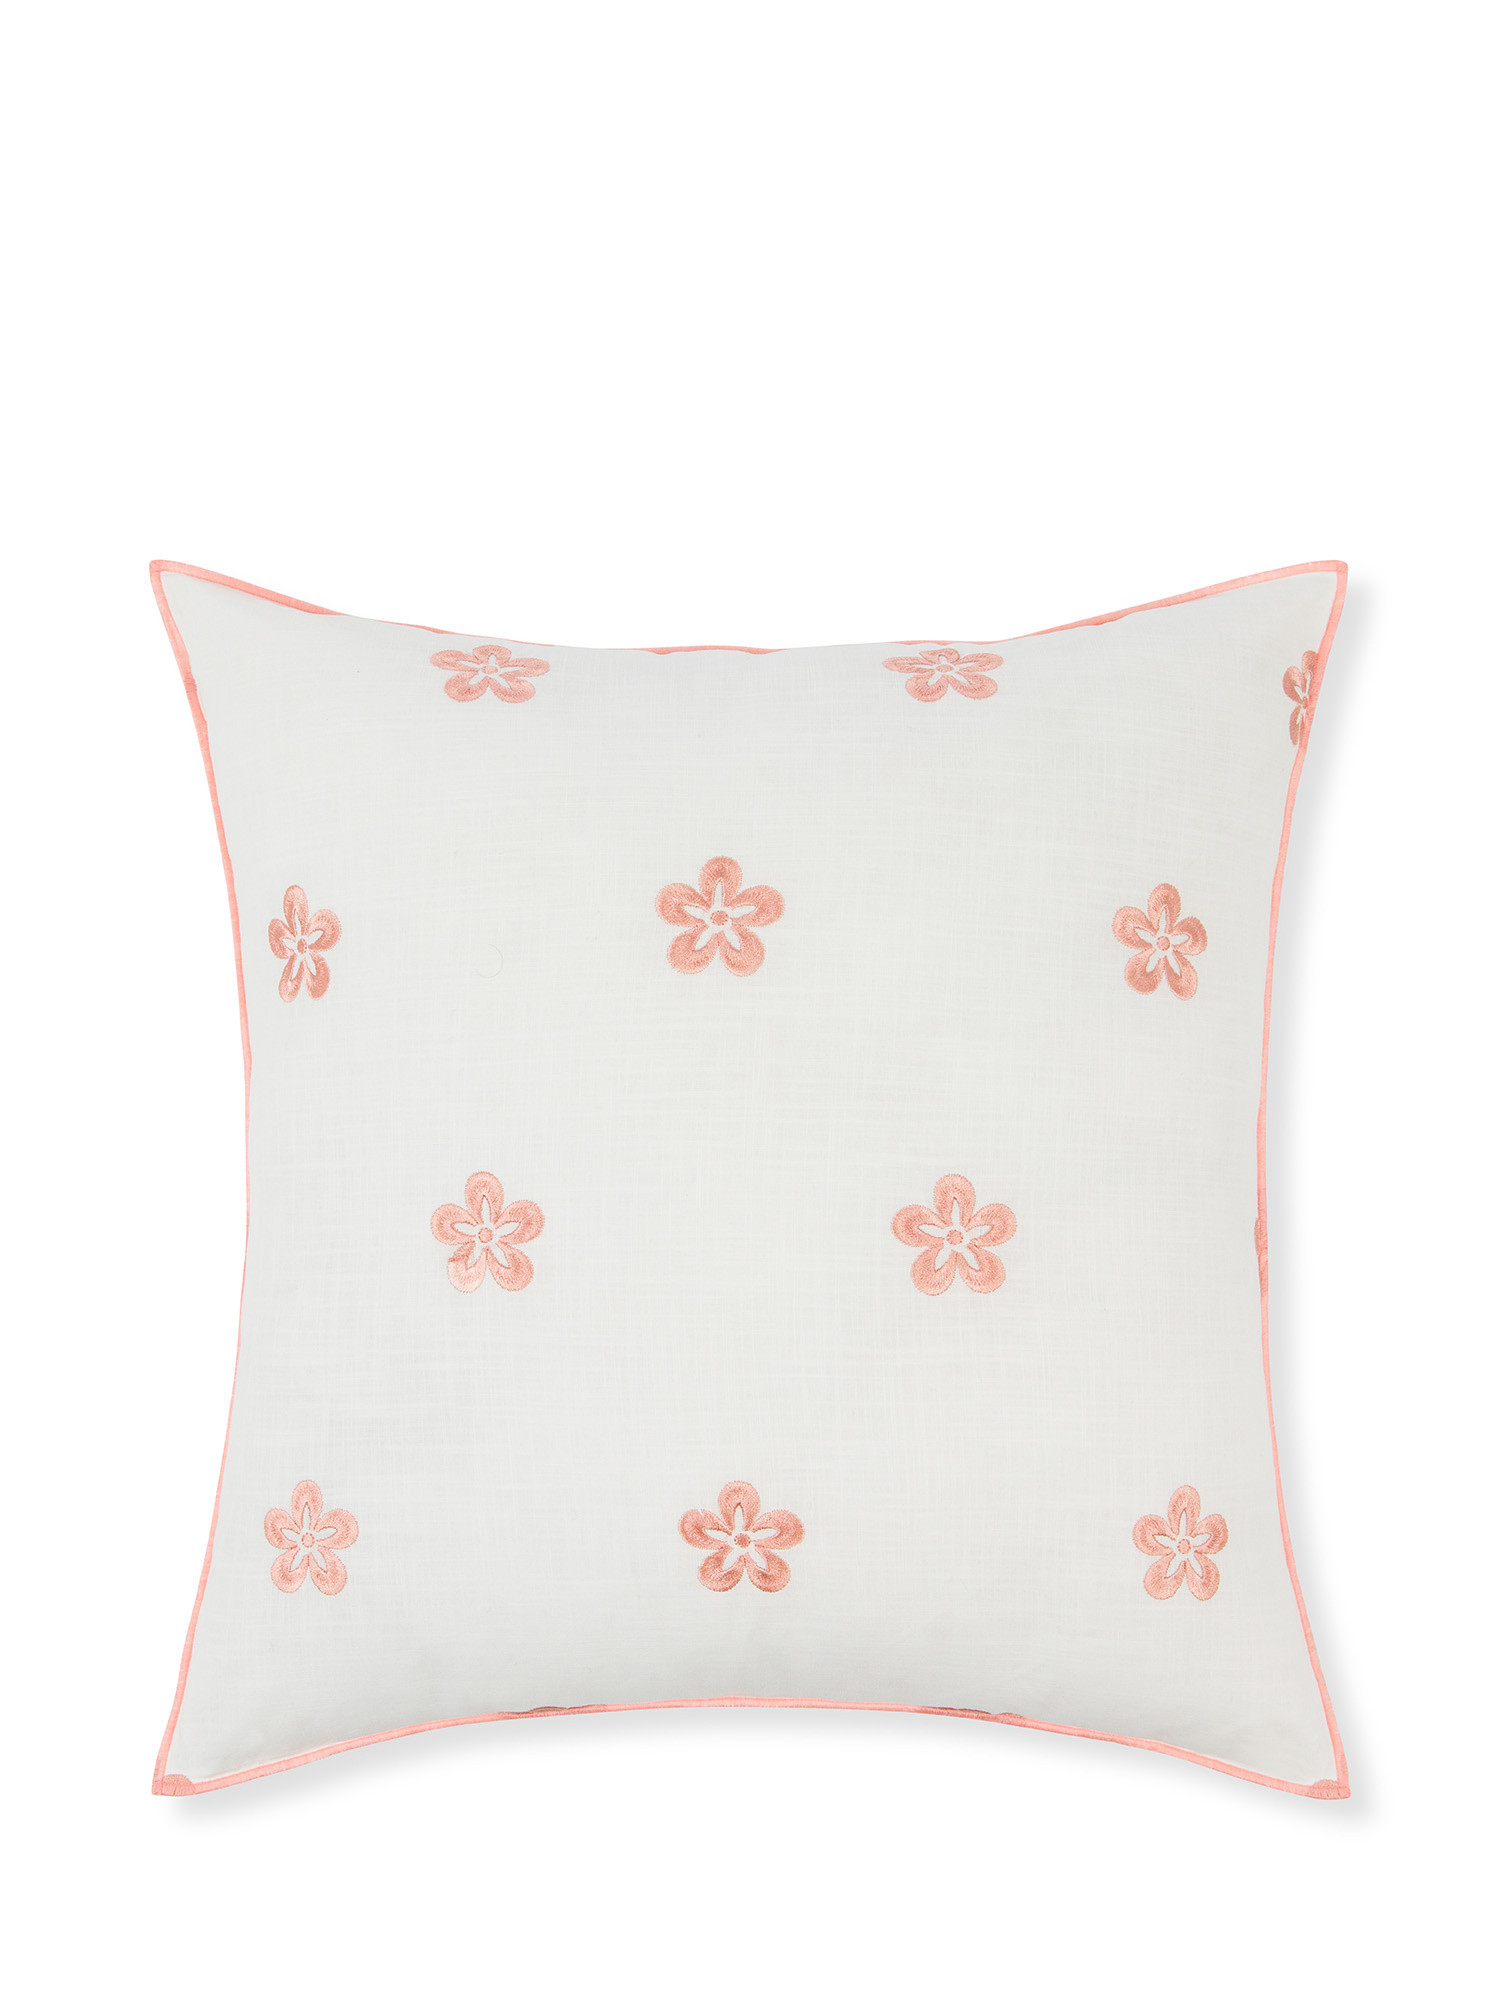 Cotton cushion with embroidery 45x45cm, Pink, large image number 0